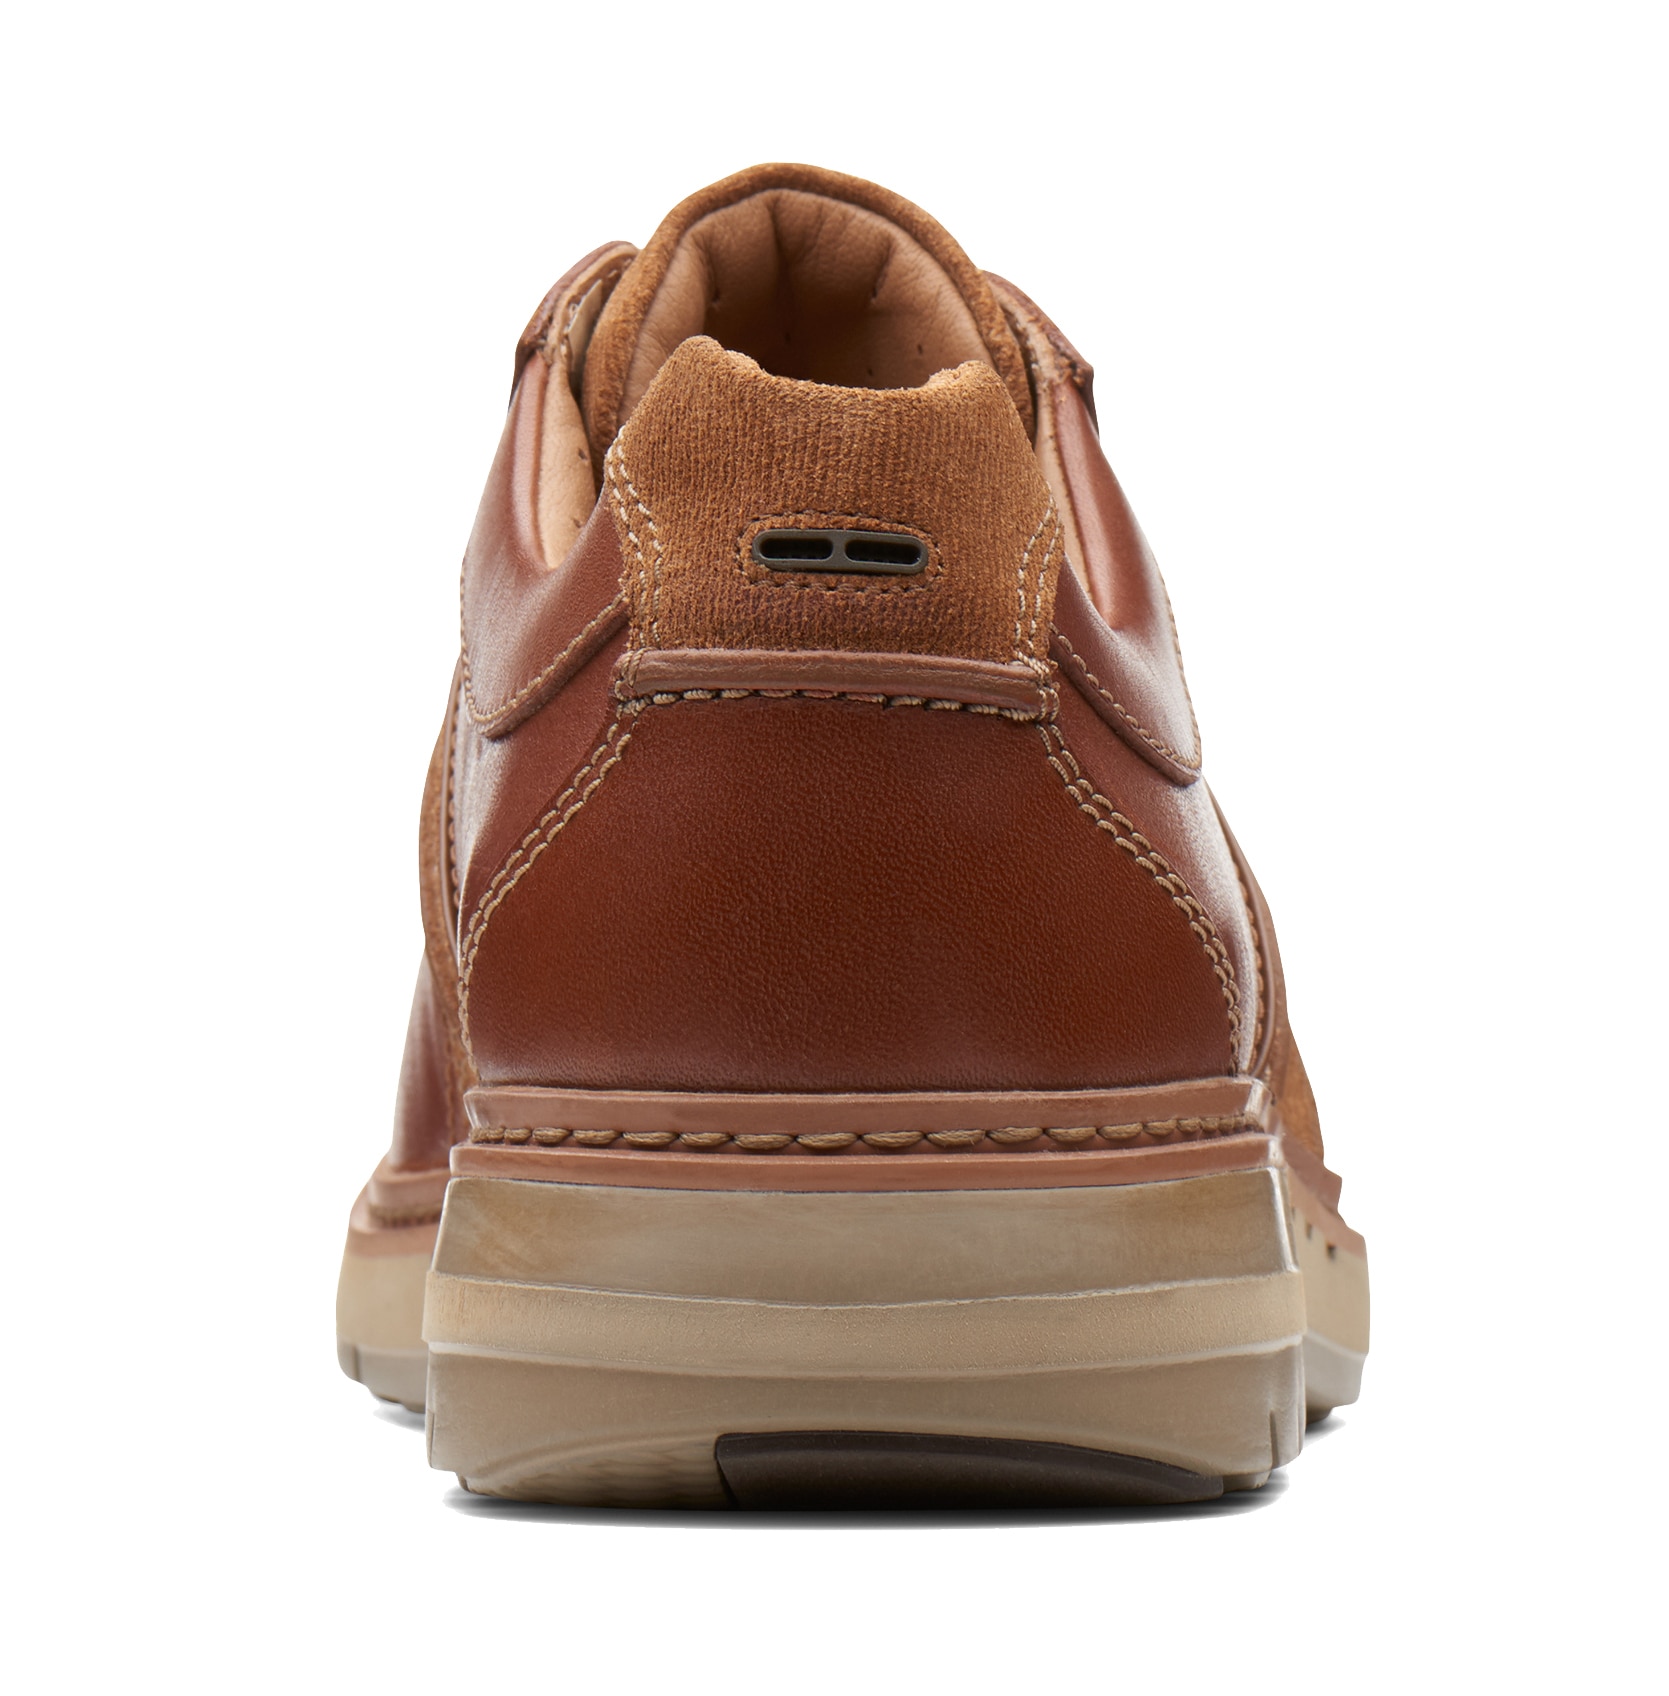 clarks new arrivals 219